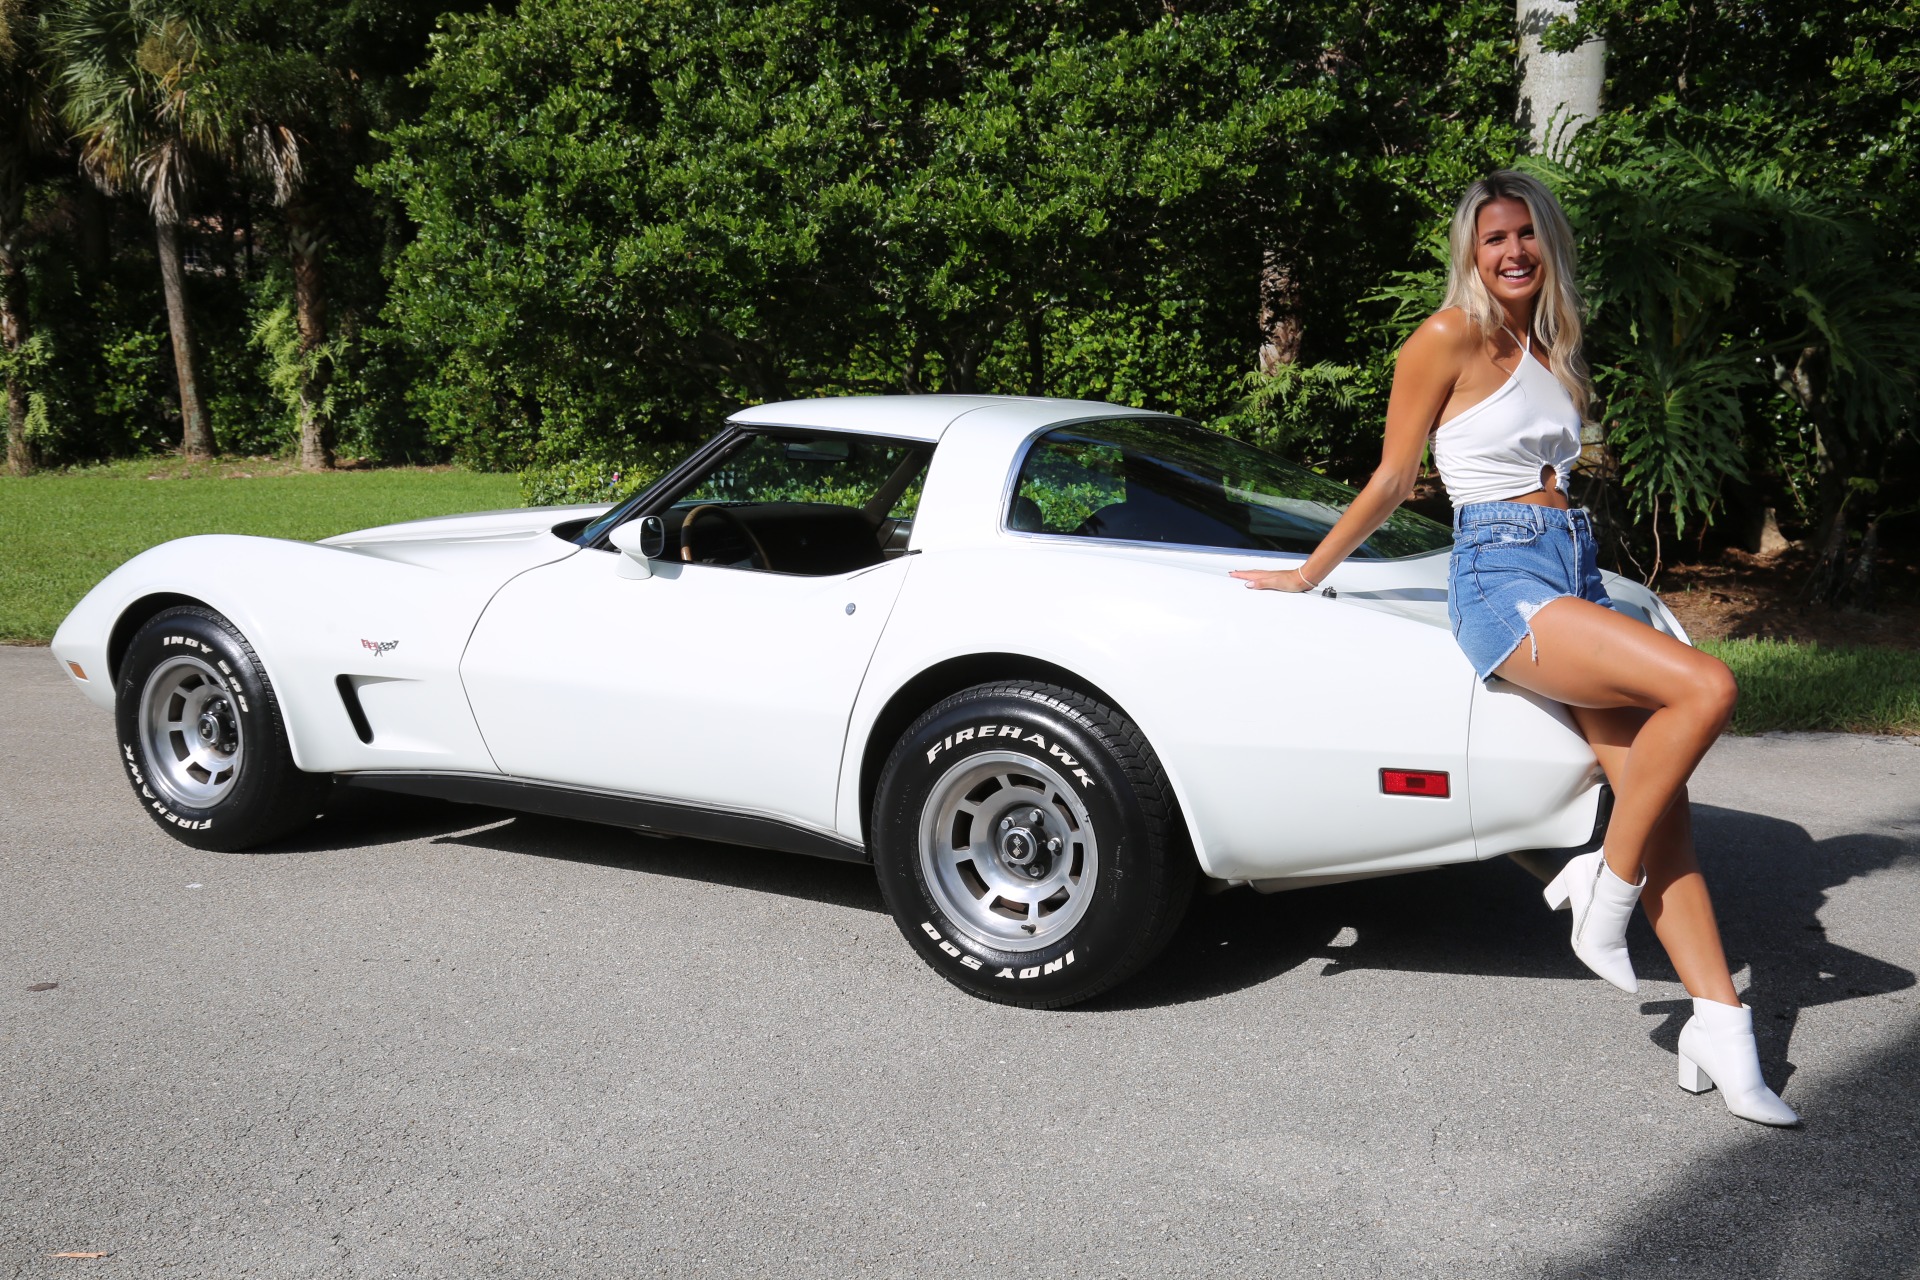 Used 1978 Chevrolet Corvette Anniversary Edition for sale $18,000 at Muscle Cars for Sale Inc. in Fort Myers FL 33912 1